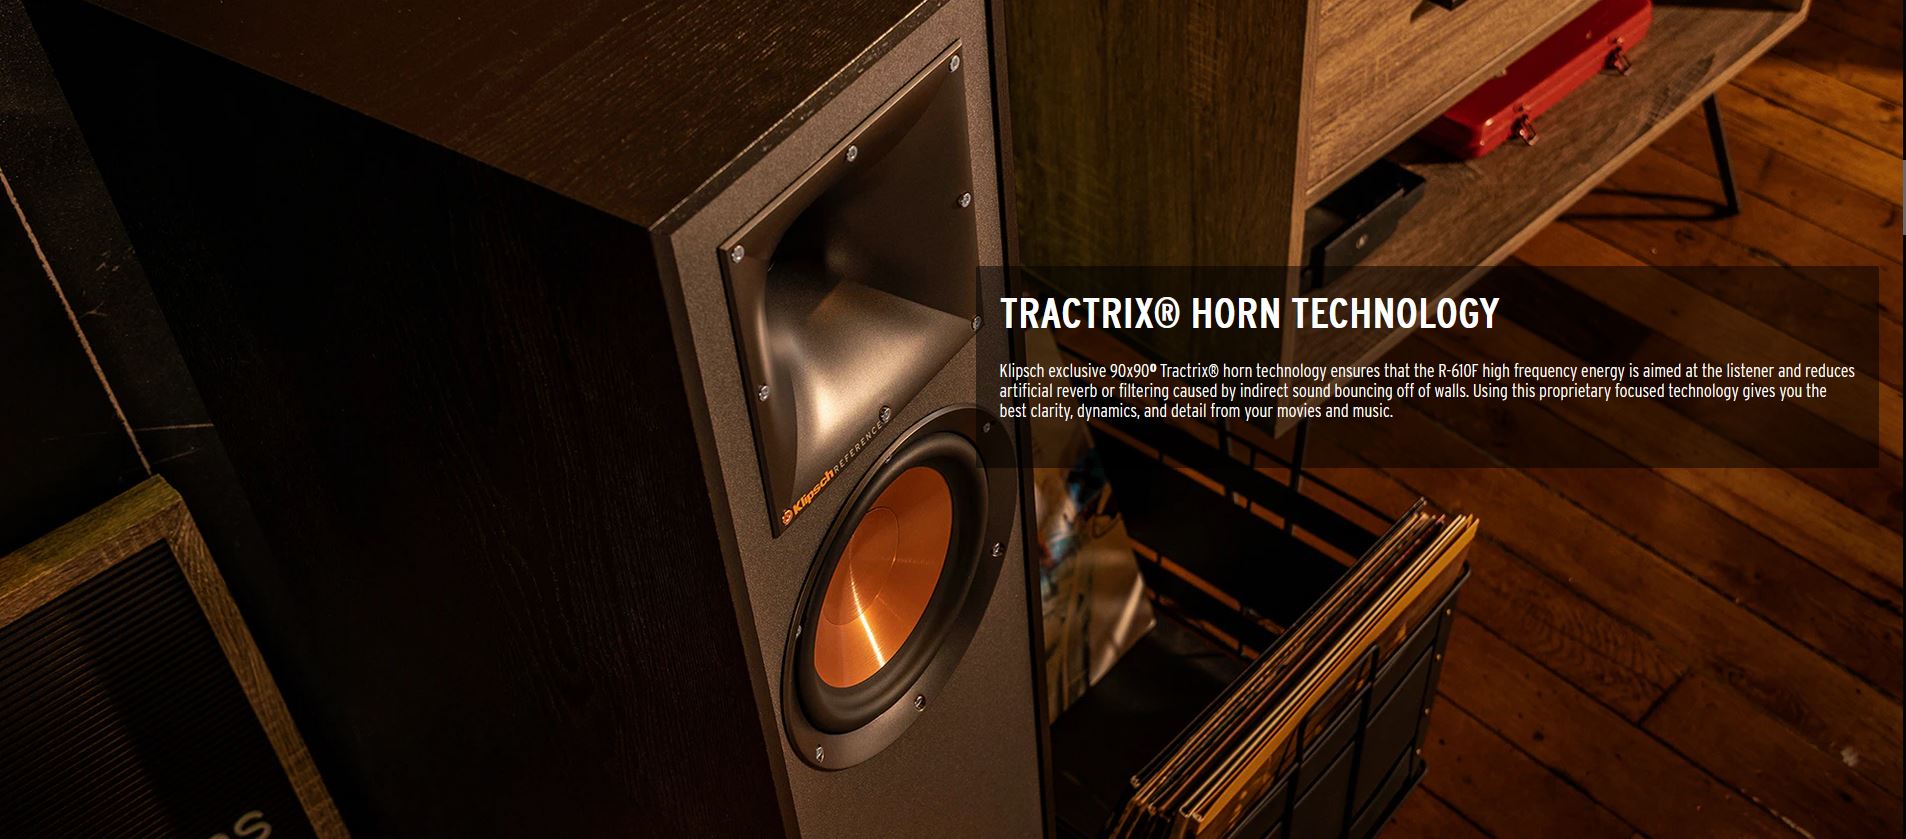 Klipsch exclusive 90x90 Tractrix horn technology ensures that the R-610F high frequency energy is aimed at the listener and reduces artificial reverb or filtering caused by indirect sound bouncing off of walls. Using this proprietary focused technology gives you the best clarity, dynamics, and detail from your movies and music.